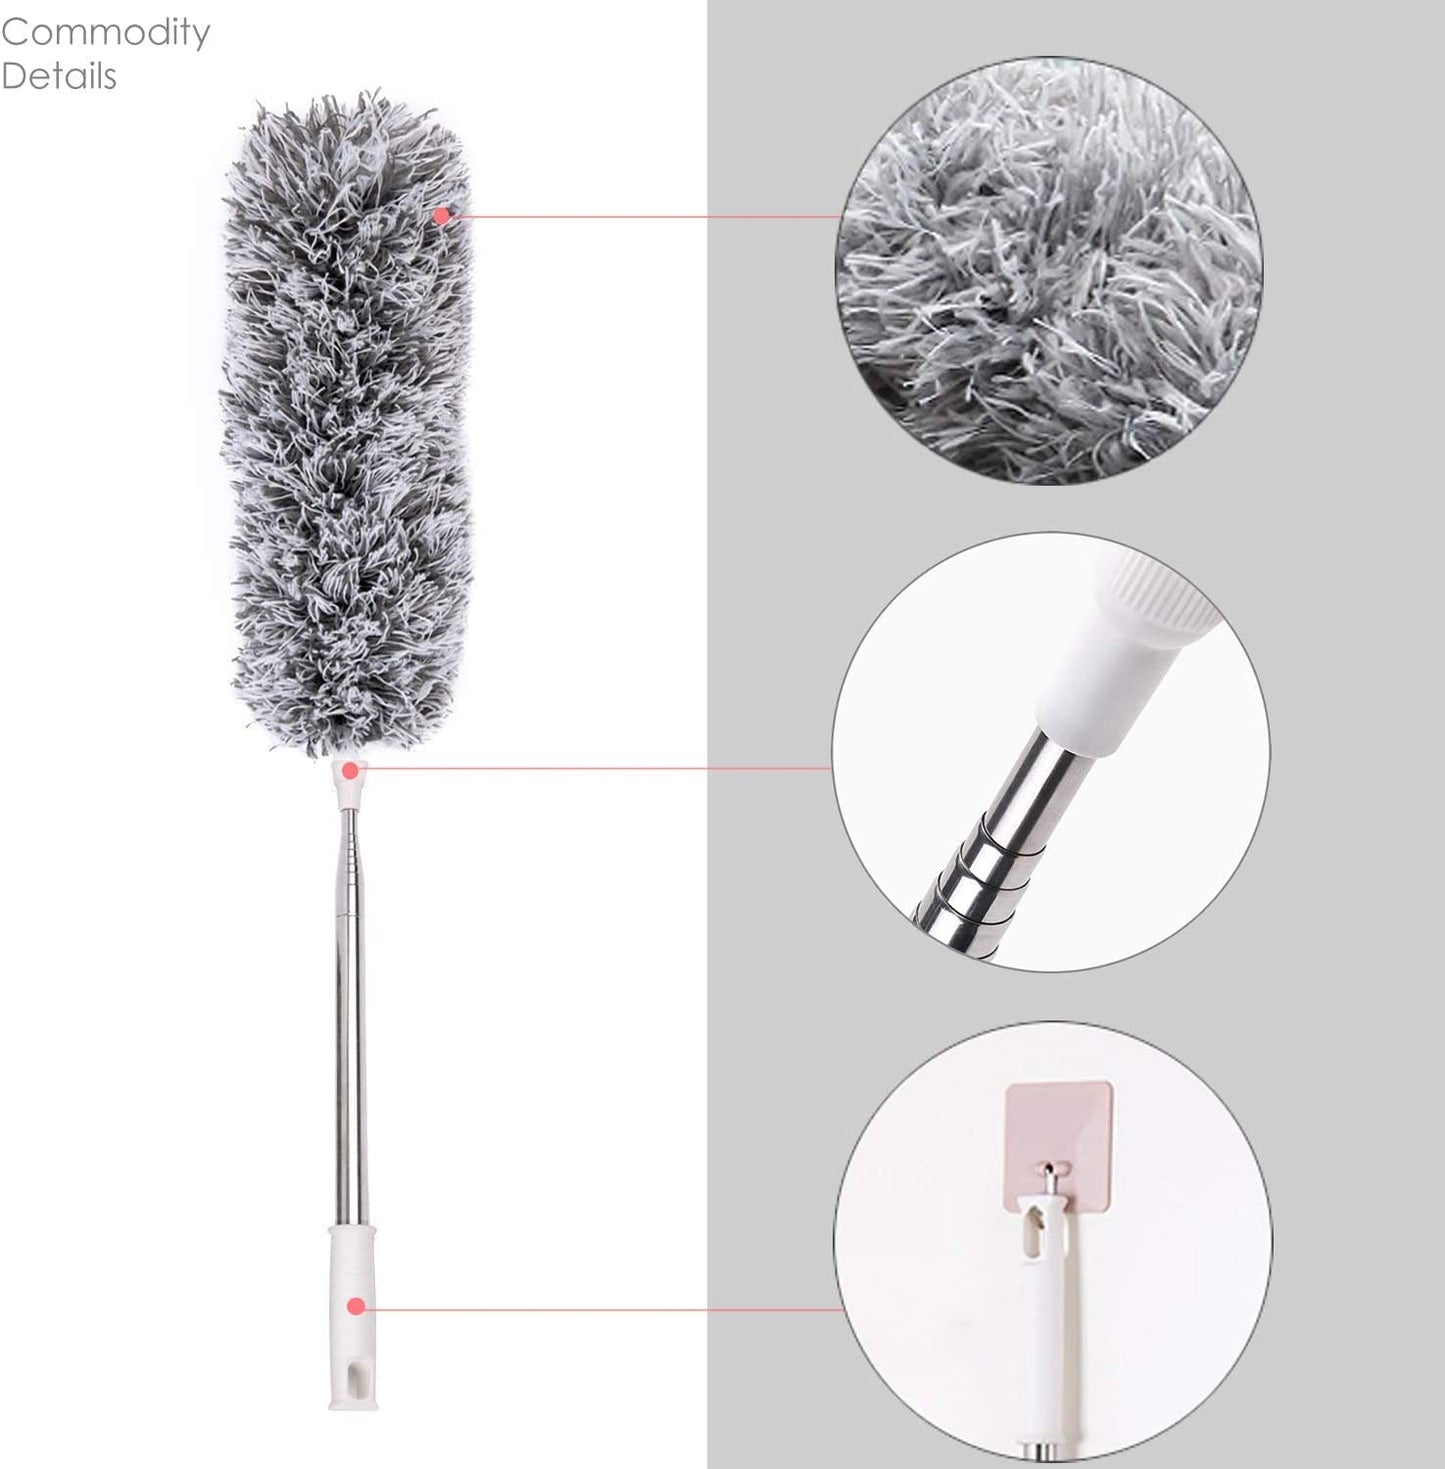 Microfiber Feather Extendable Fan Cleaning Duster with 100 inches